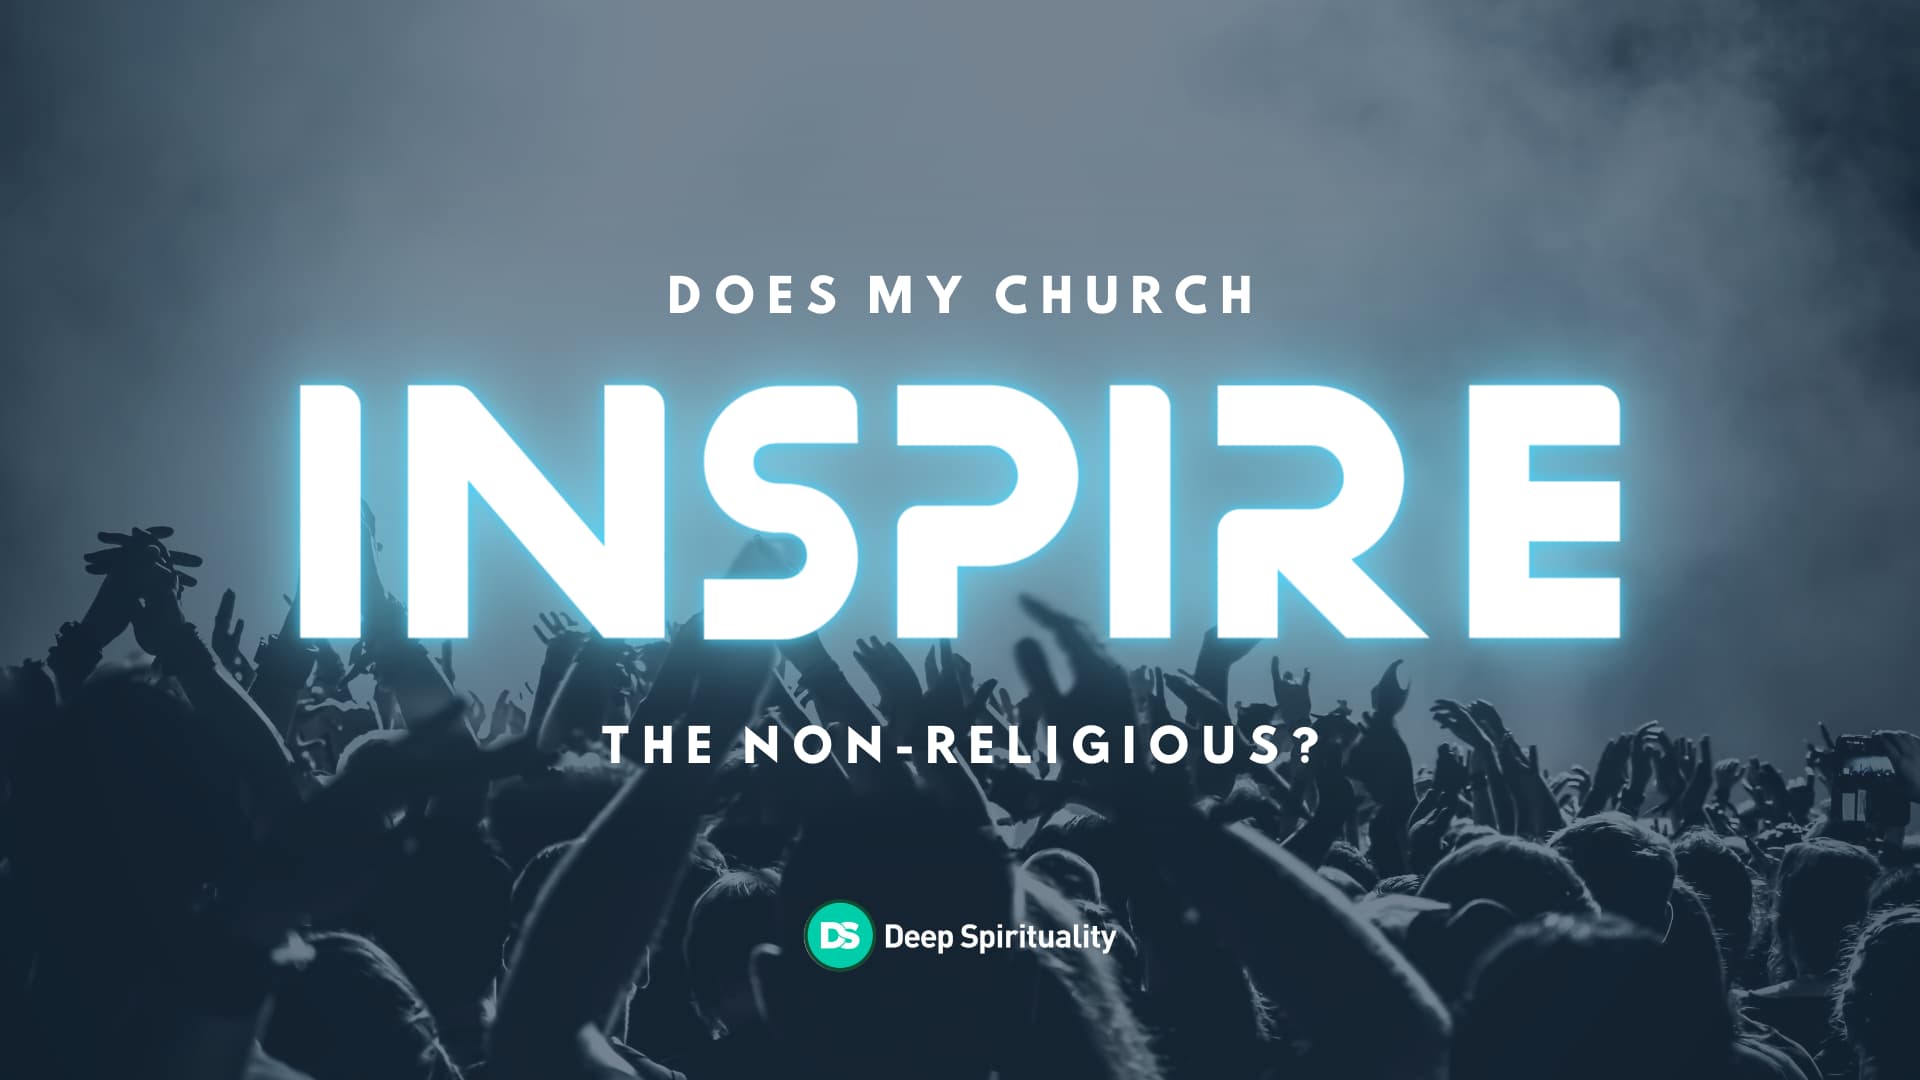 Does My Church Inspire the Non-Religious? 8